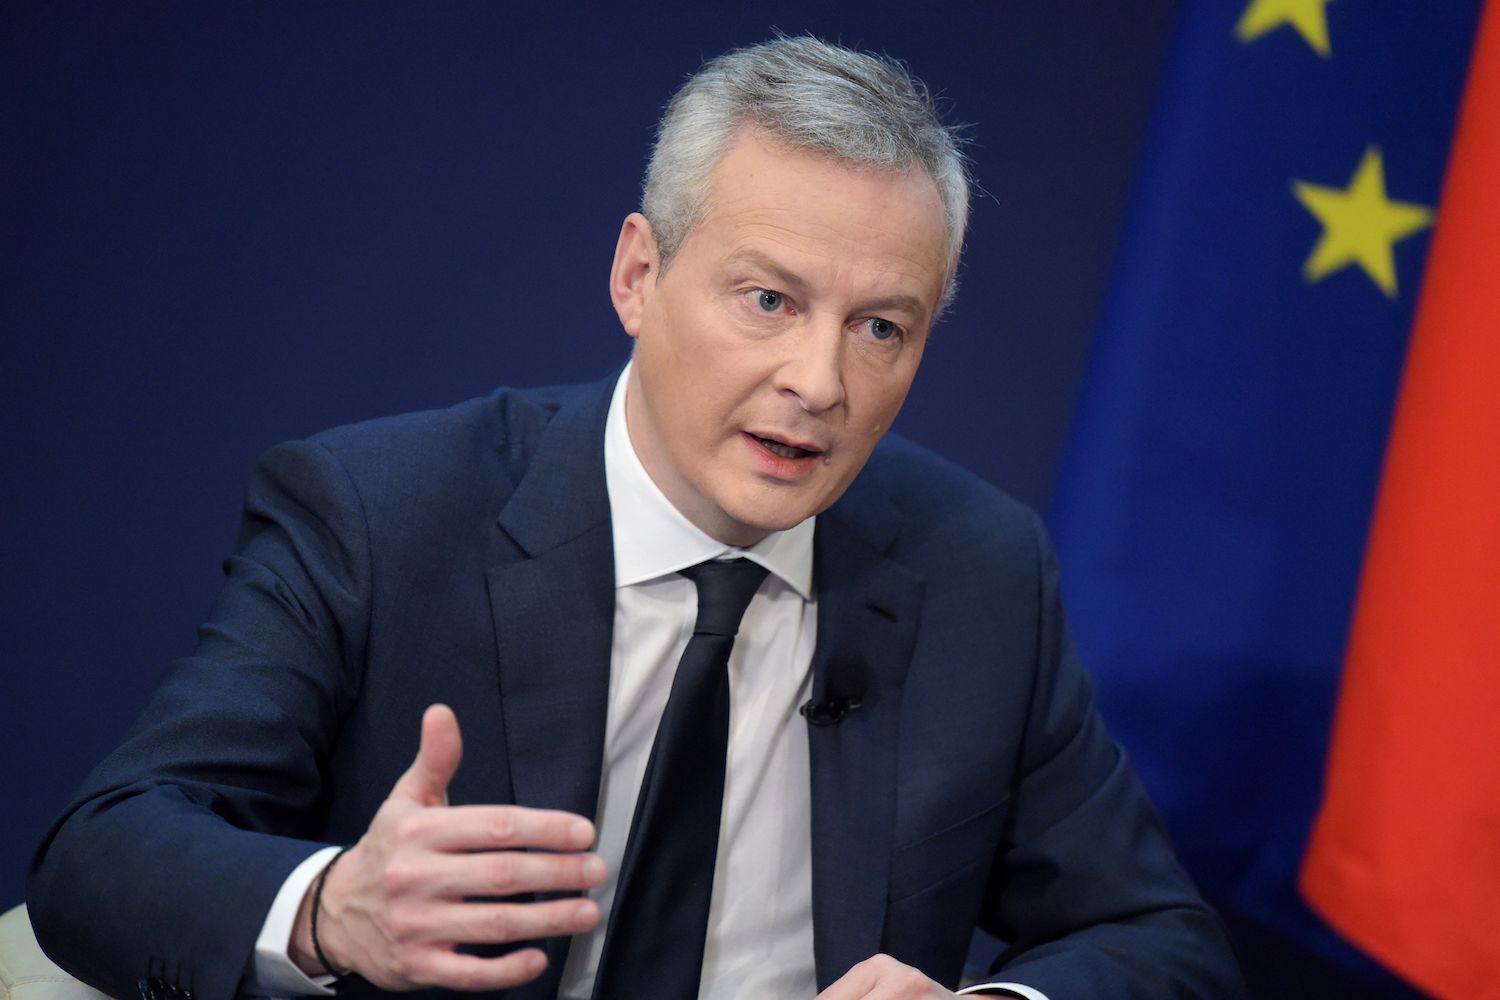 French Finance Minister: It Will Be Impossible to Trade With Iran Once Us Sanctions Are Imposed